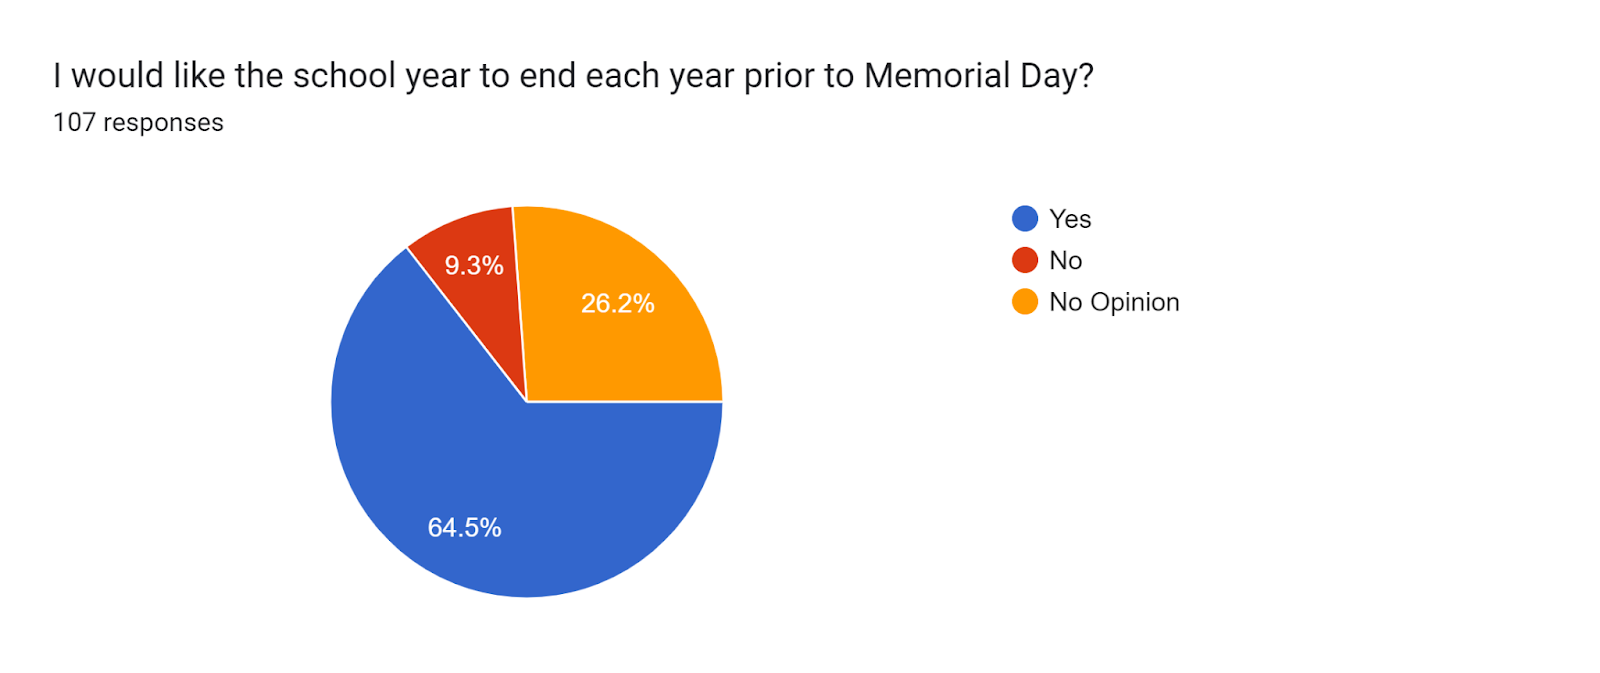 Forms response chart. Question title: I would like the school year to end each year prior to Memorial Day? . Number of responses: 107 responses.